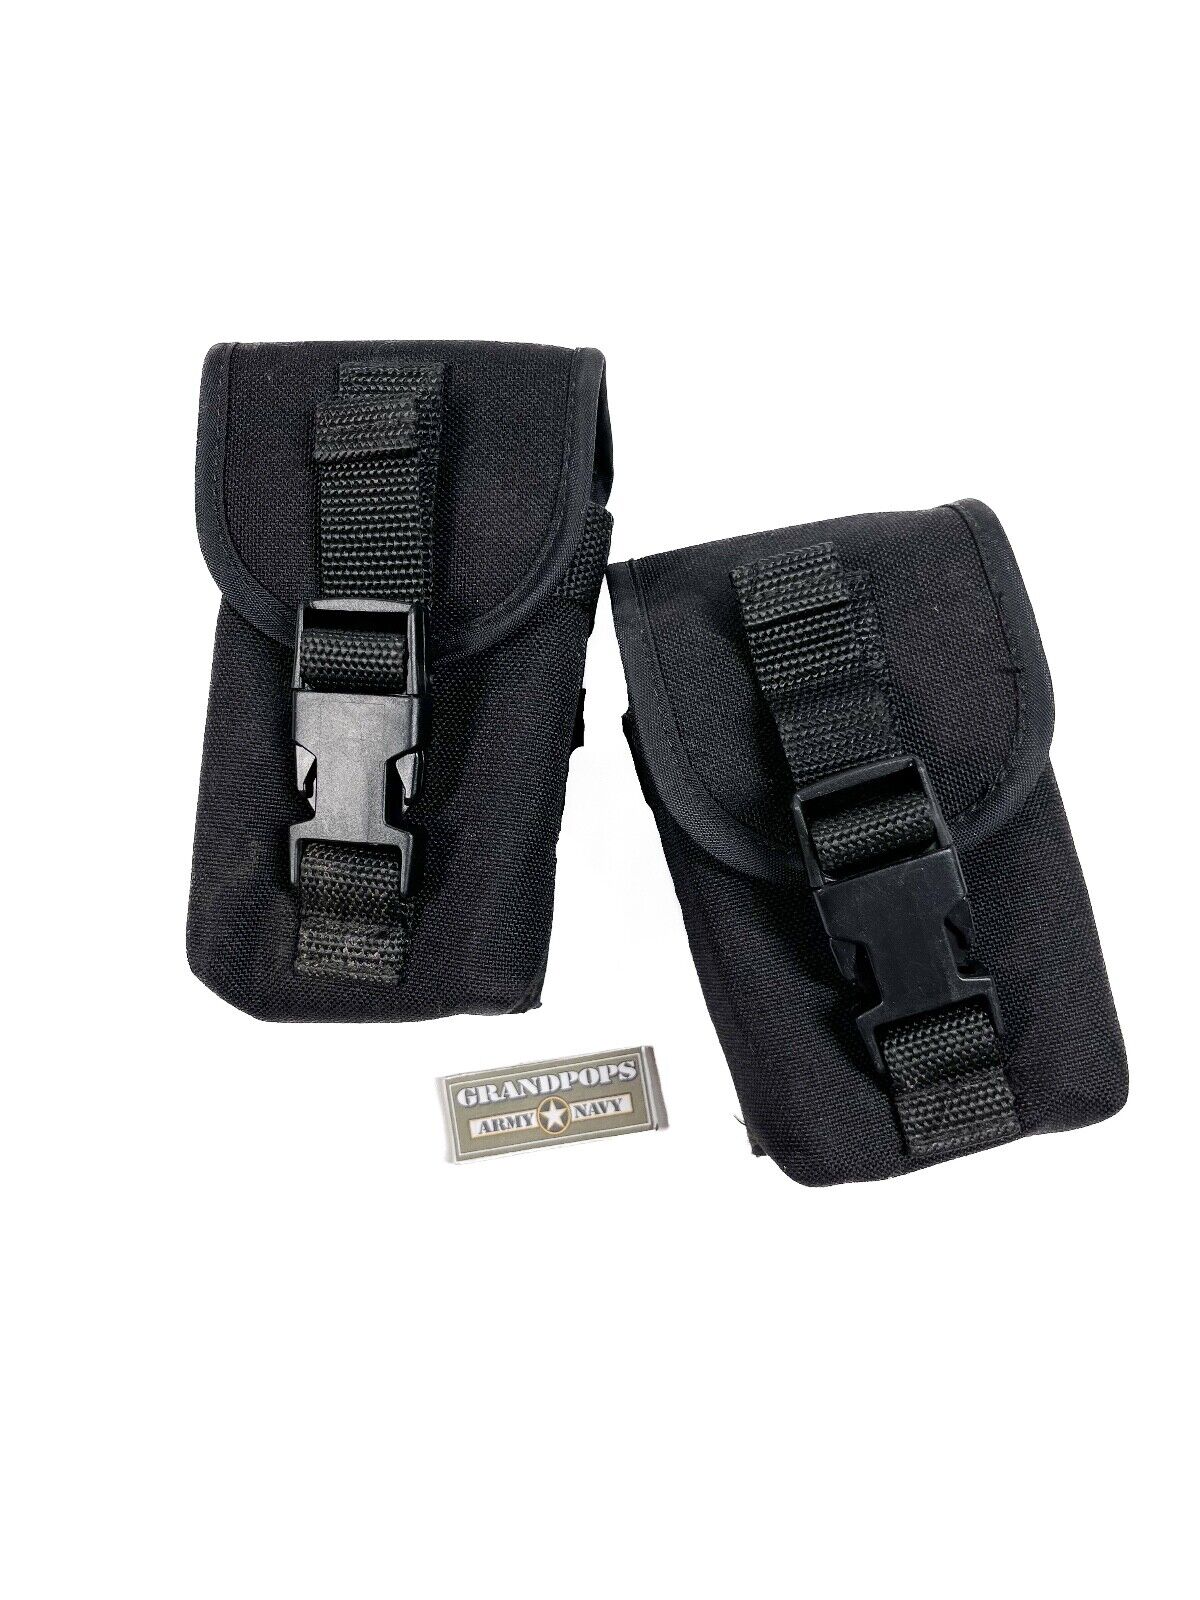 U.S. Military Jac Custom Pouches Black 2 Cell Molle Pouch Made In USA –  GRANDPOPSARMYNAVY